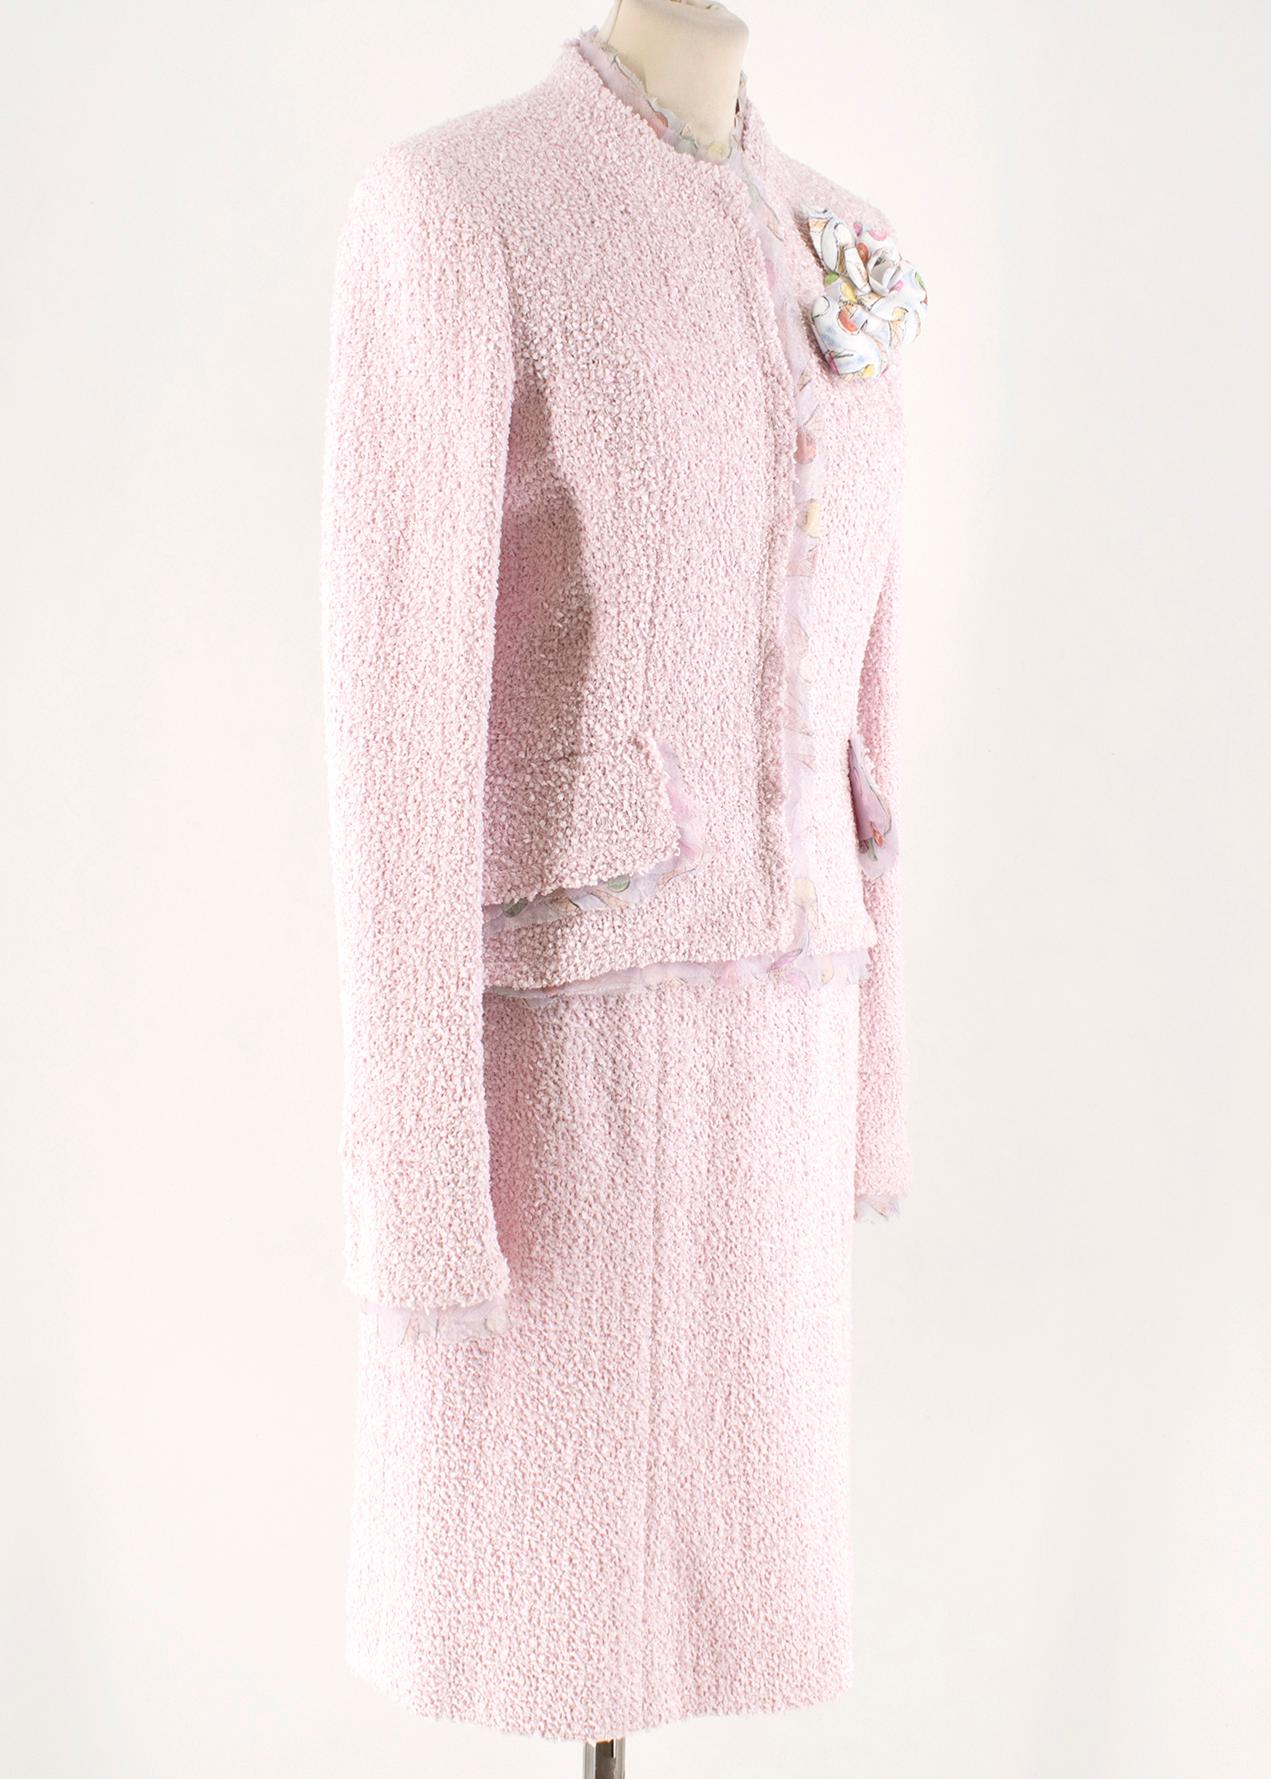 Chanel Pink Tweed Skirt Suit W/ Ice Cream Print Trim & Camellia 

Jacket 
- Pink Tweed Jacket
- Round neck, long sleeved 
- Buttoned down center front with CC logo print
- Multi color print silk raw trim hems around neck, center front, pockets and 